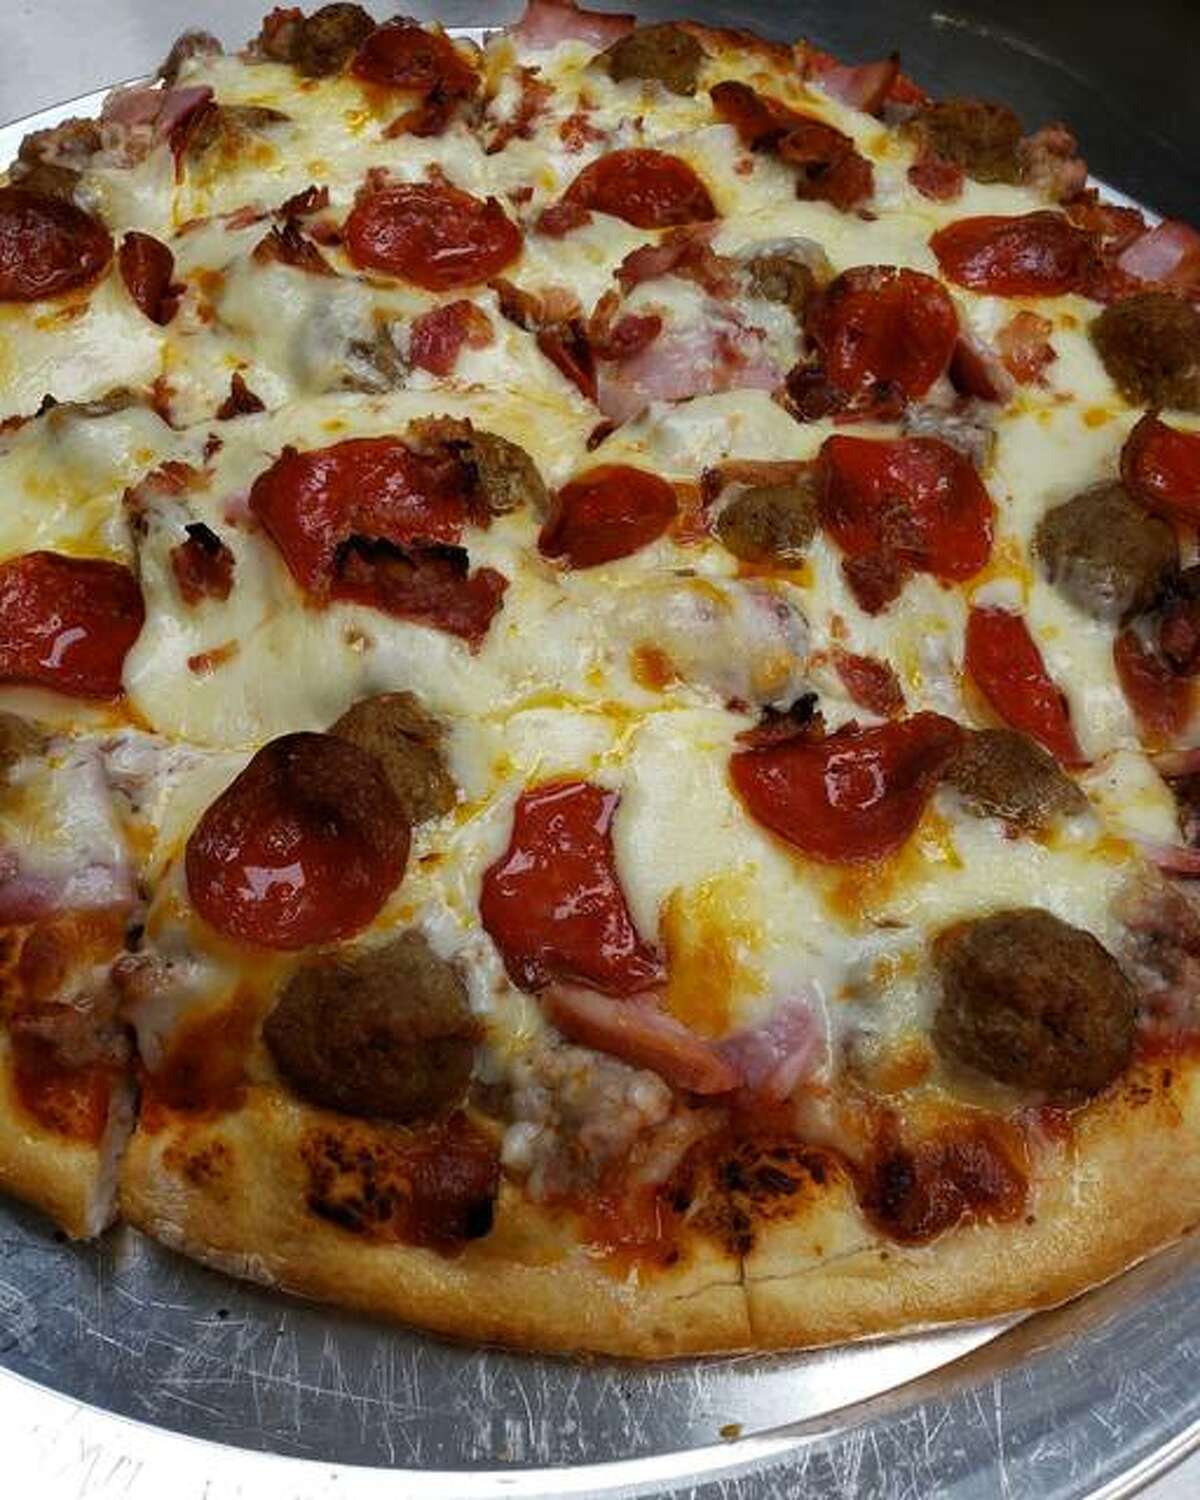 The Carnivore, served at the 1880 Pizza Pasta House in Jerseyville, was among the items featured during Epic Pizza Week last year. This year the Great Rivers & Routes Tourism Bureau is planning four "Epic" food weeks during June.